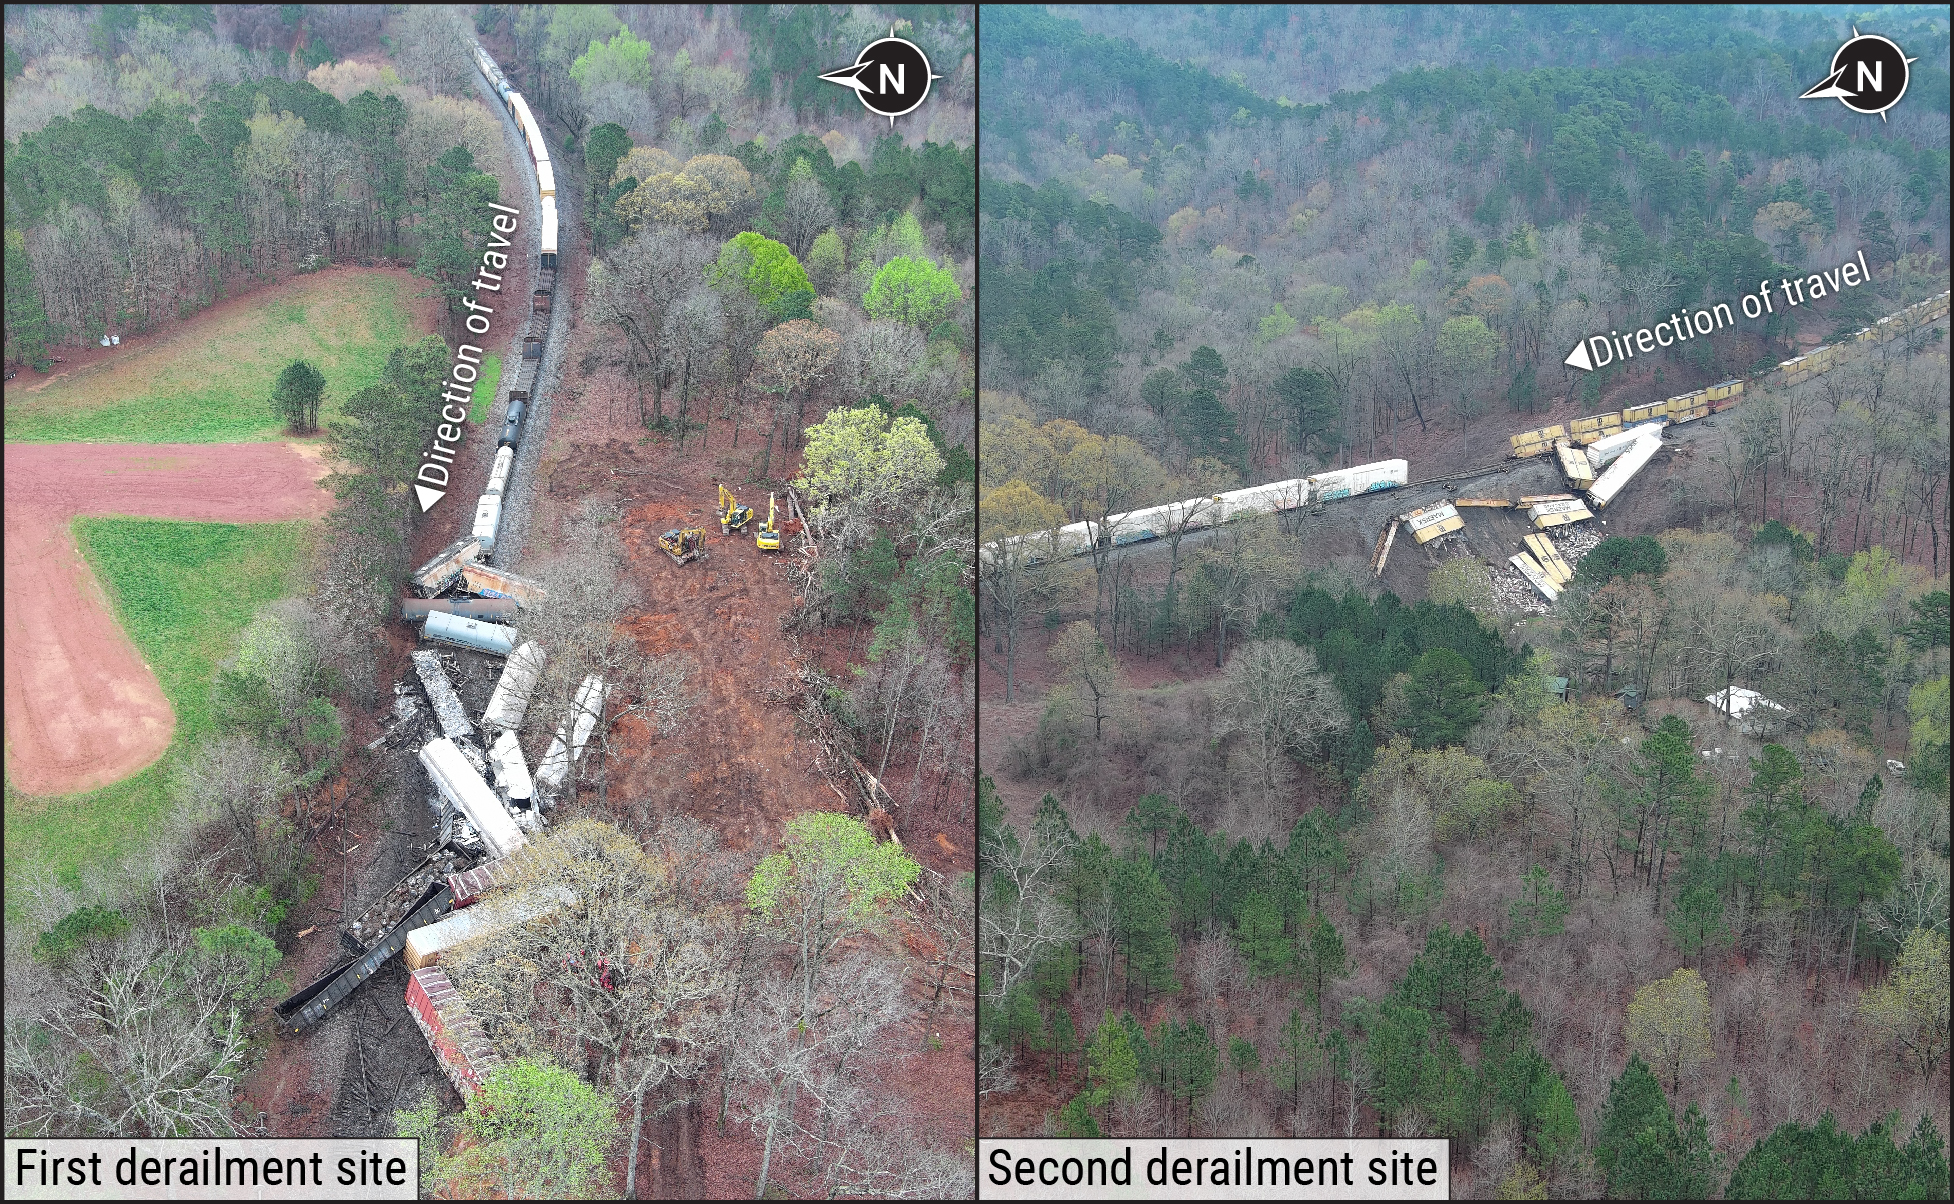 Aerial view of the first derailment site (left) and the second derailment site (right). 